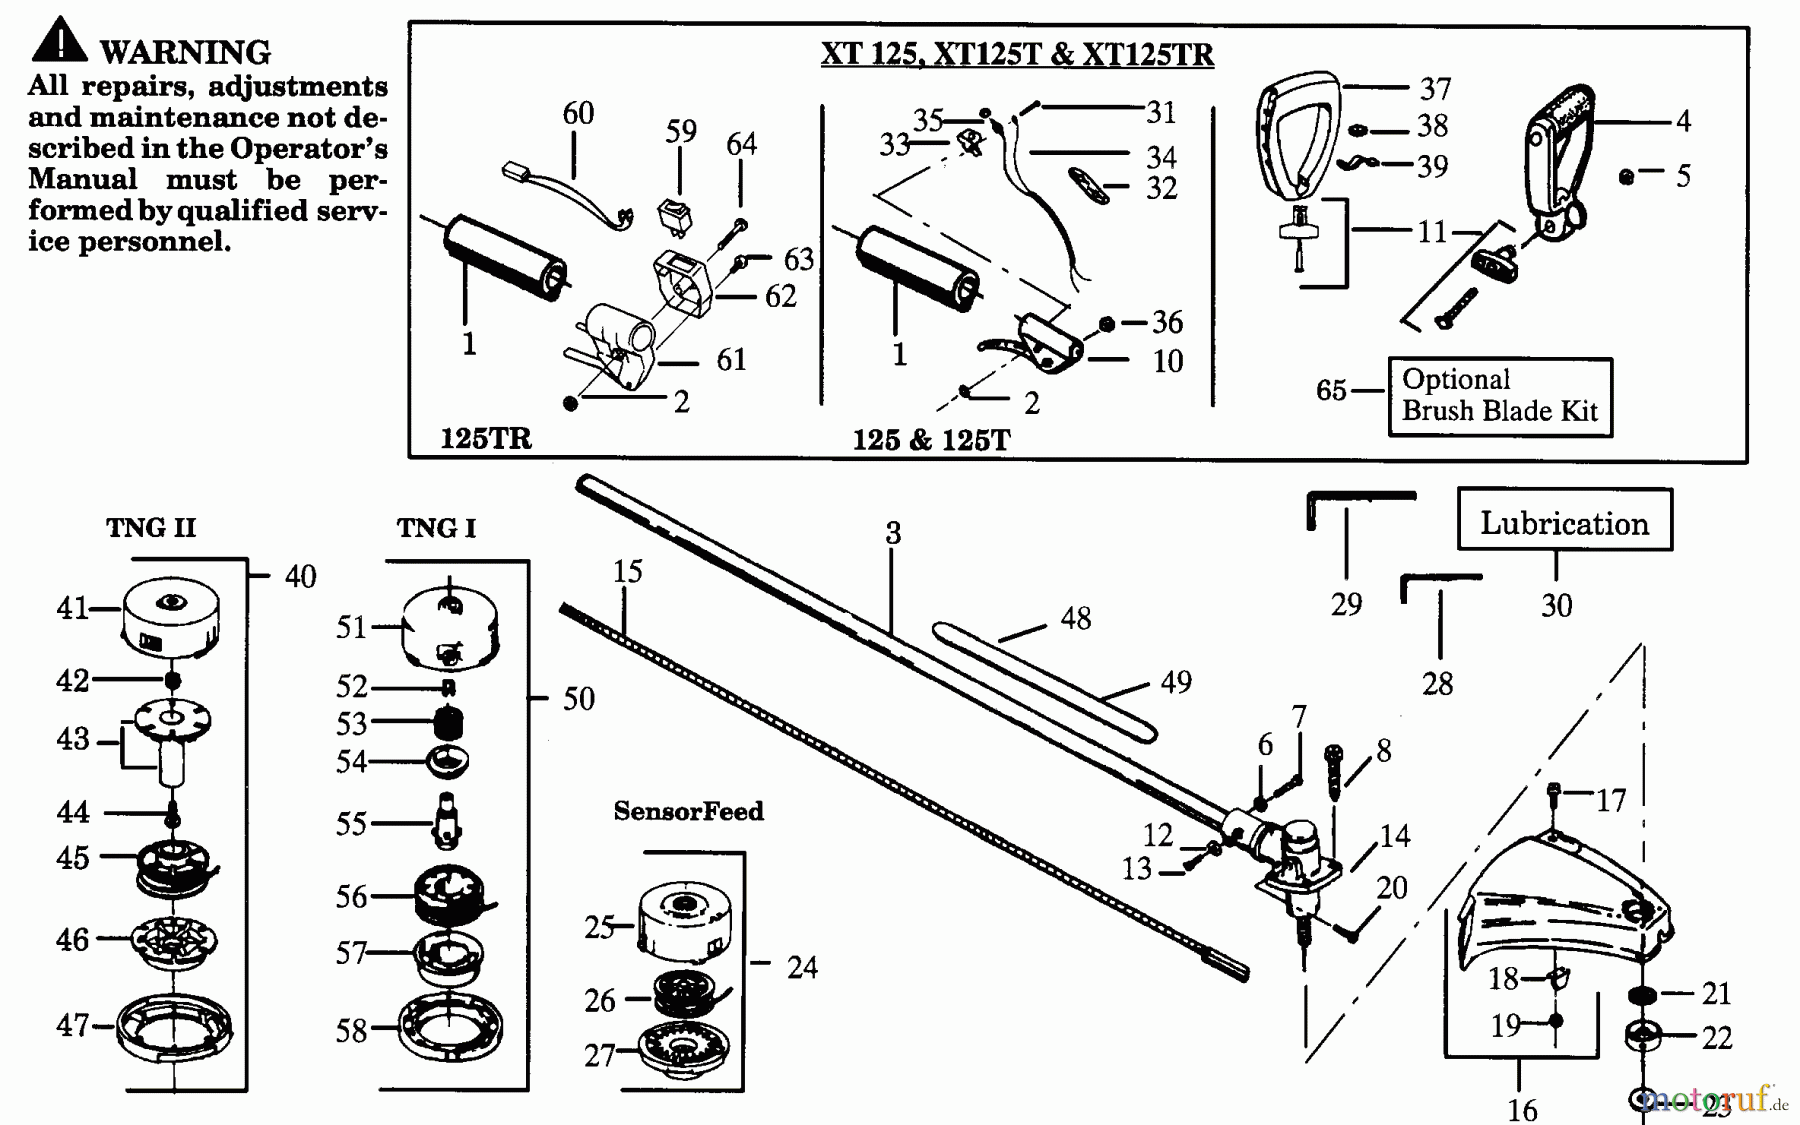  Poulan / Weed Eater Motorsensen, Trimmer XT125T - Weed Eater String Trimmer CUTTING HEAD & DRIVE SHAFT ASSEMBLY